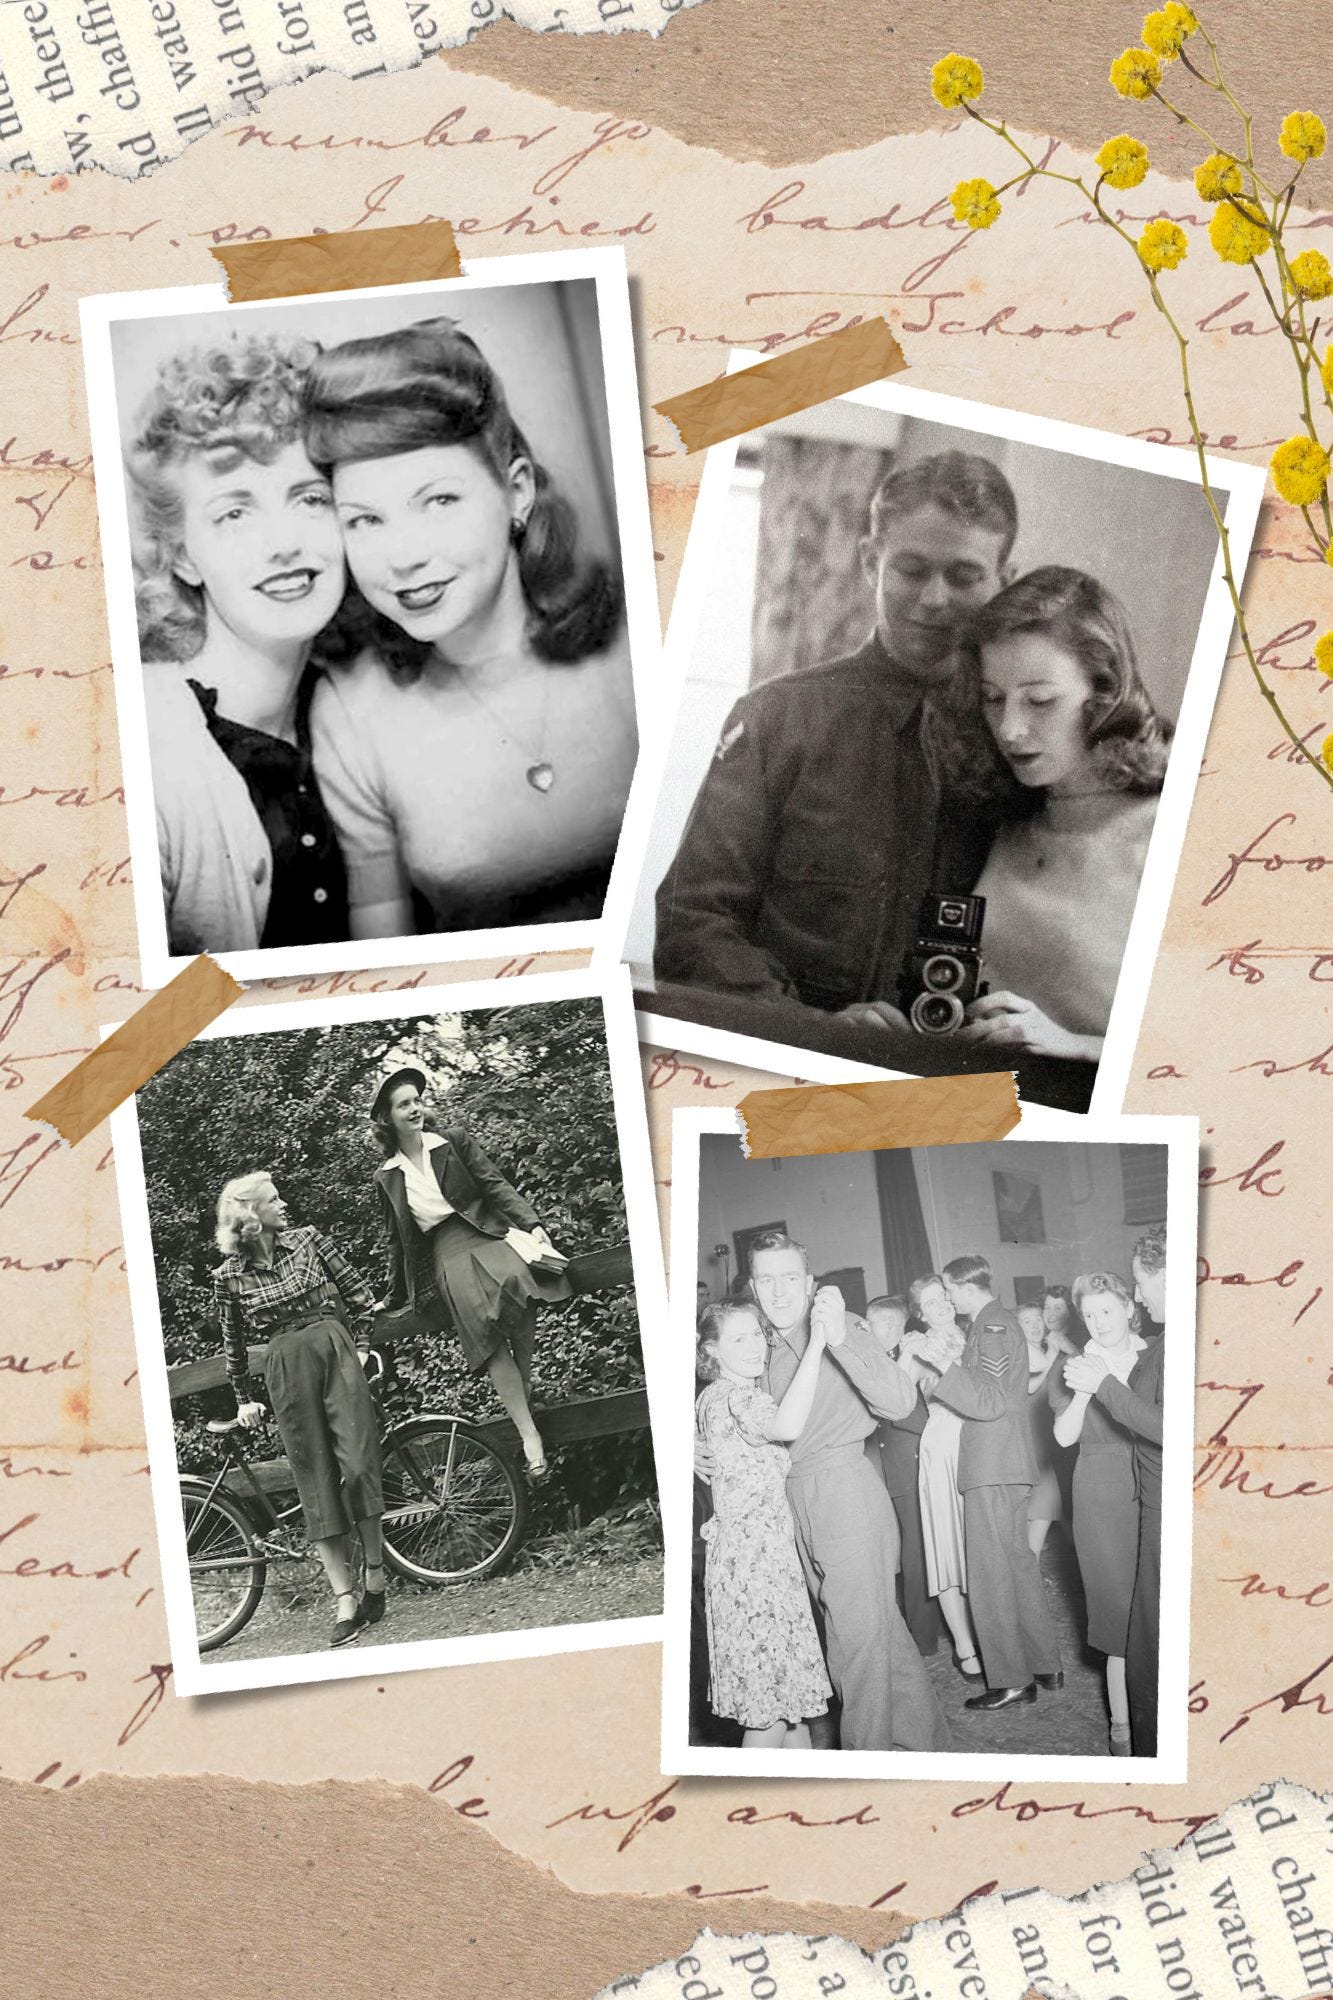 Black and white images of people from the 1940s on a background of handwritten letters